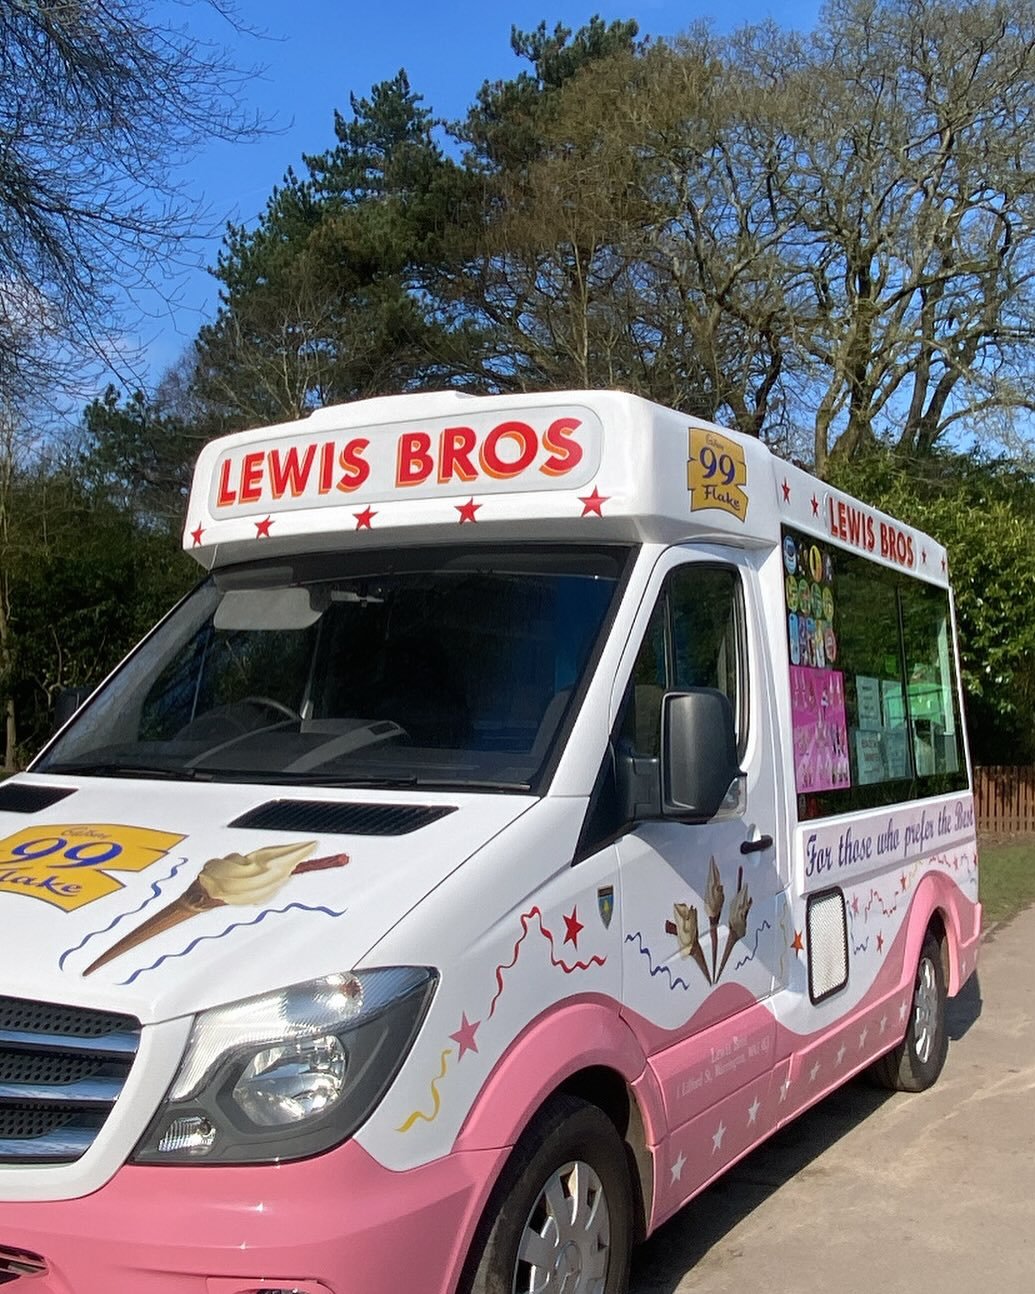 ☀️HAPPY BANK HOLIDAY!!! ☀️
Our vans will be out ALL bank holiday weekend, so why not come and say hi and grab yourself a nice little treat too!!

We will be at:
Walton Hall and Gardens
Marbury Country Park
Sale Water Park

#lewisbrosicecream #icecrea